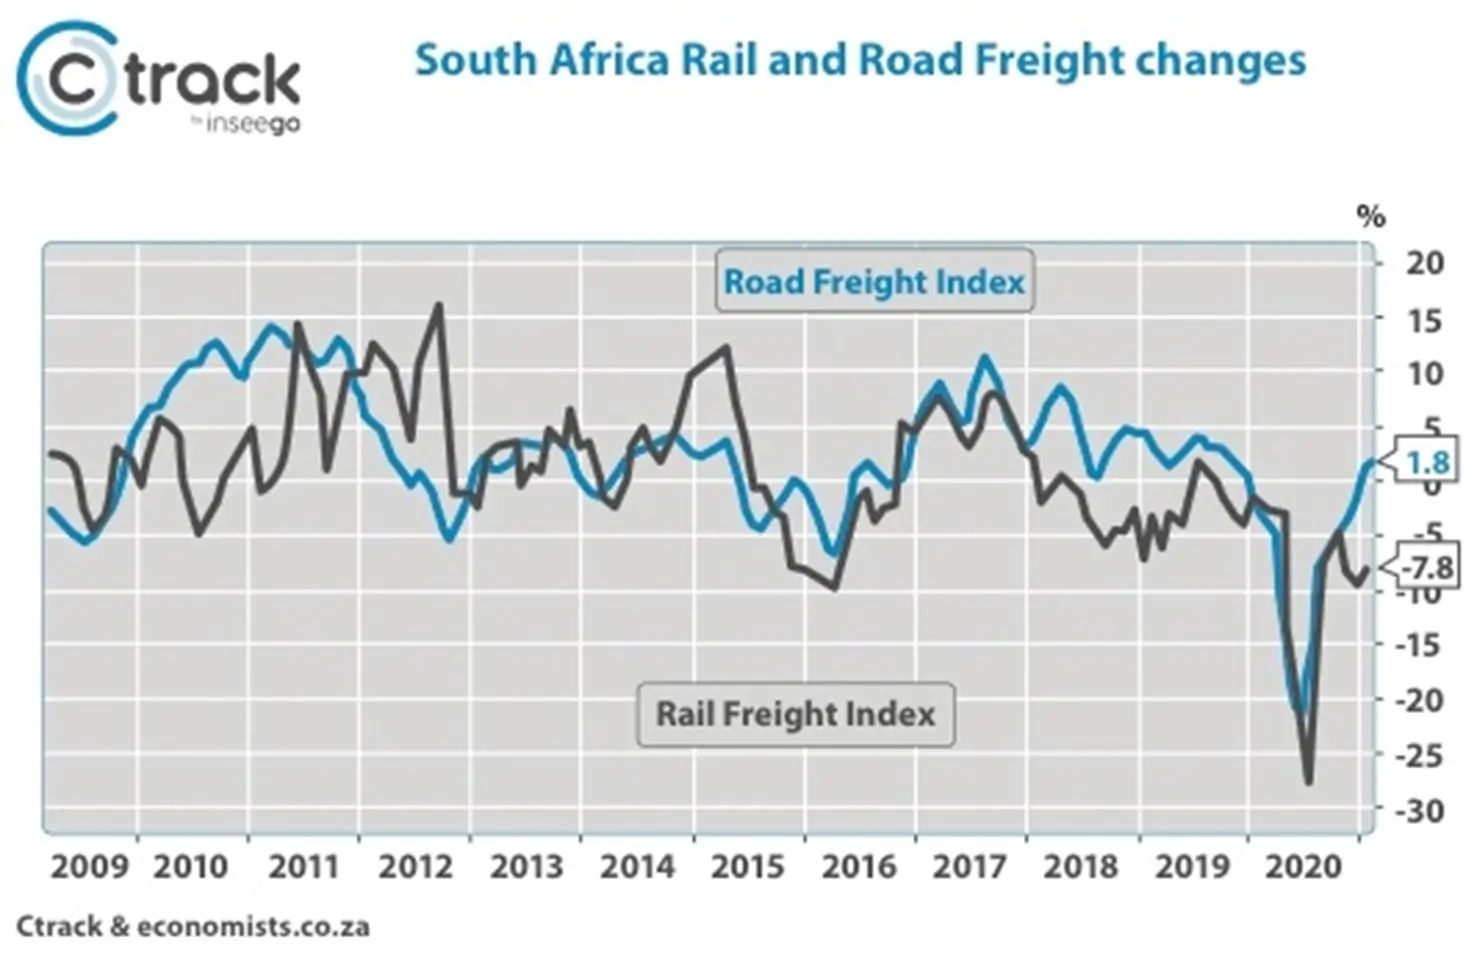 Ctrack-Transport-Indec-SA-Rail-and-Road-Freight-Changes-Feb-2021